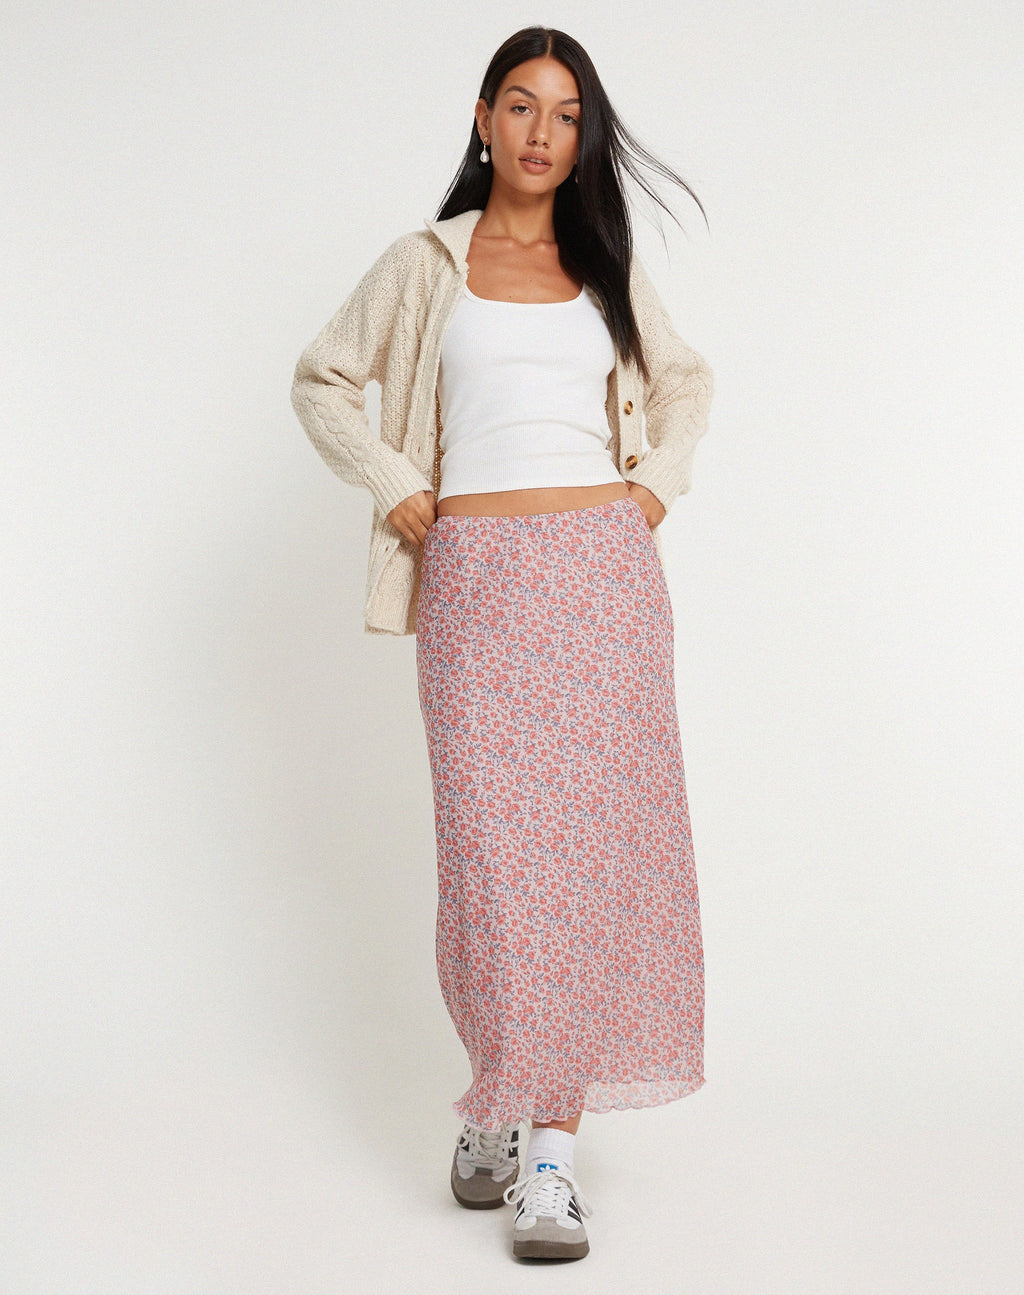 Lassie Maxi Skirt in Spring Rose Dusty Pink